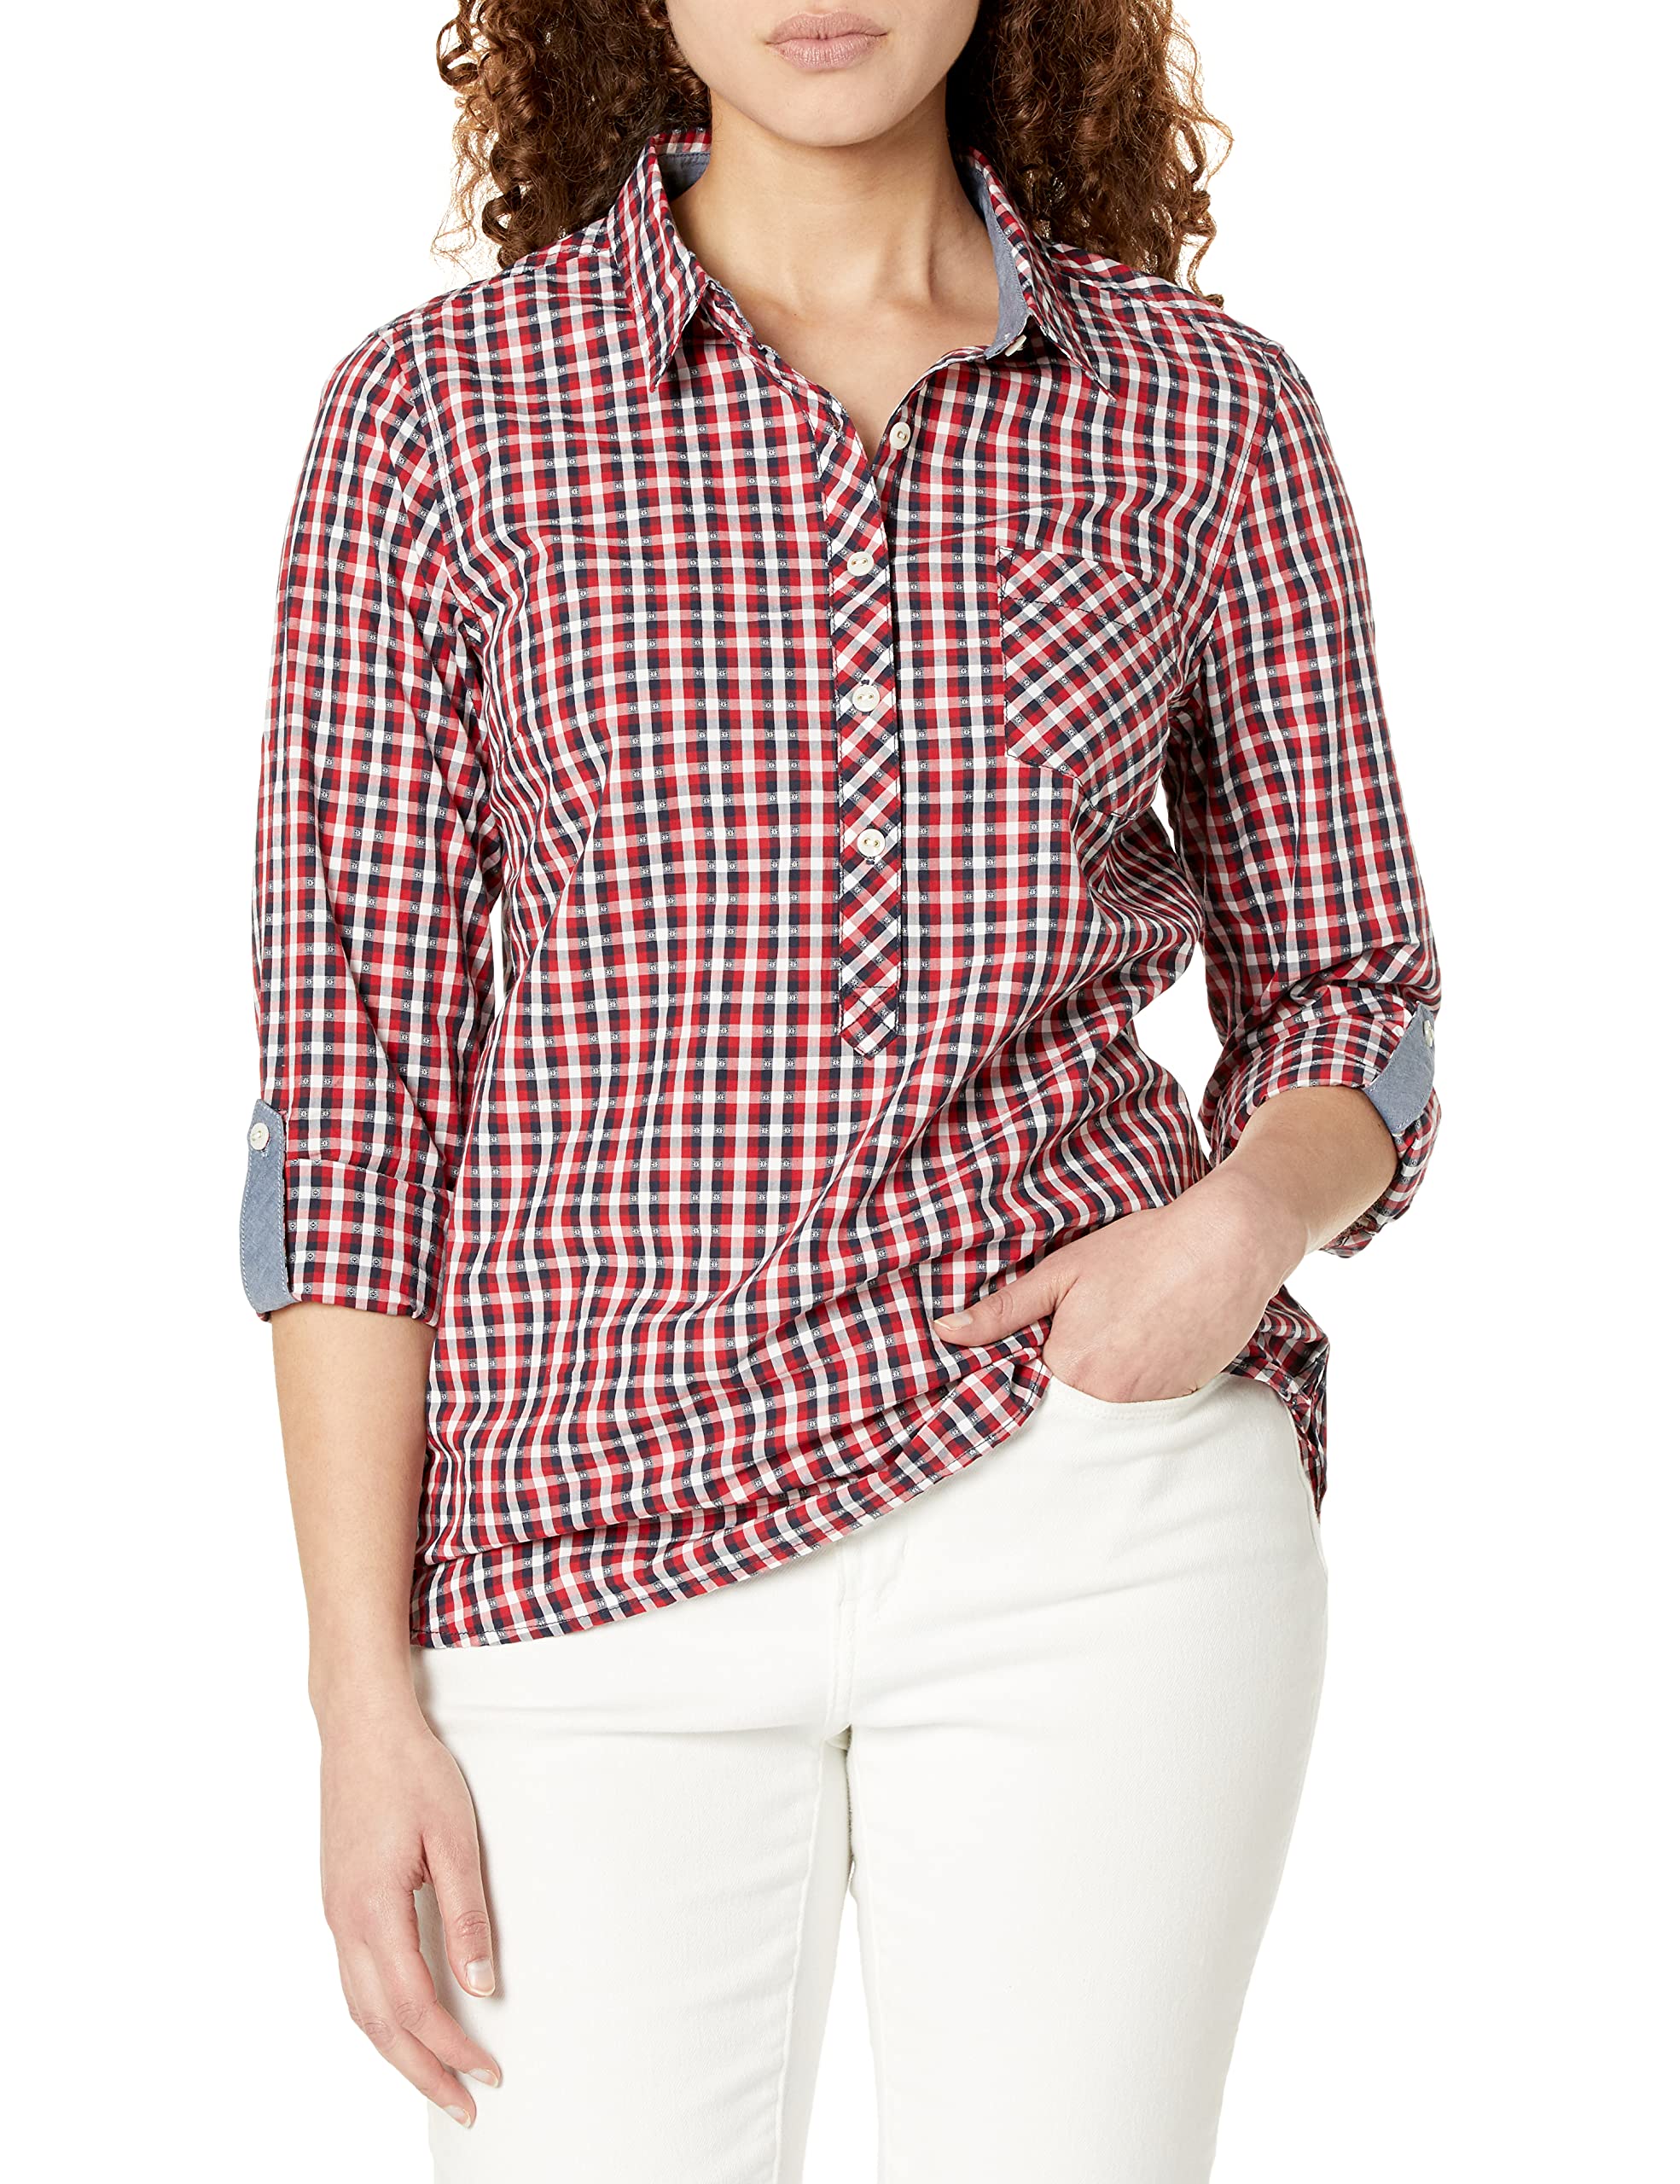 Tommy Hilfiger Women's Blouse Casual Check Roll Tab Long Sleeve